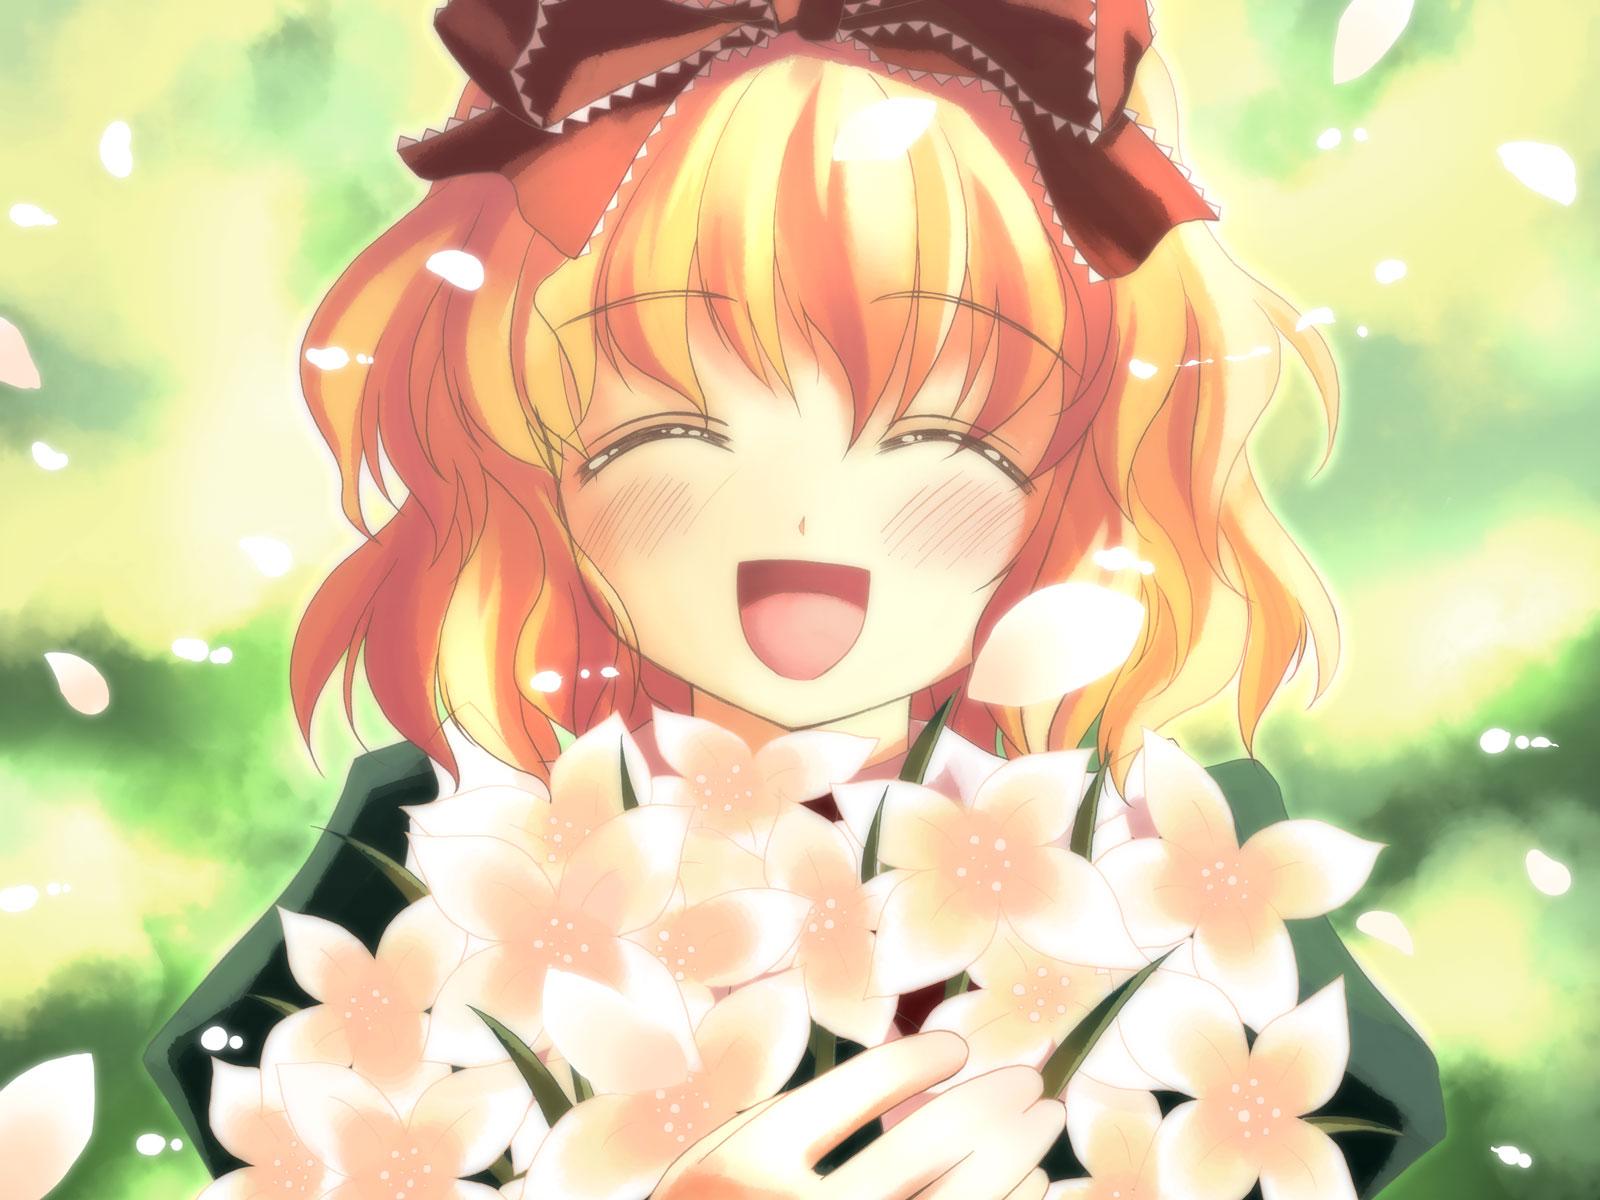 blondes, Touhou, flowers, happy, anime, flower petals